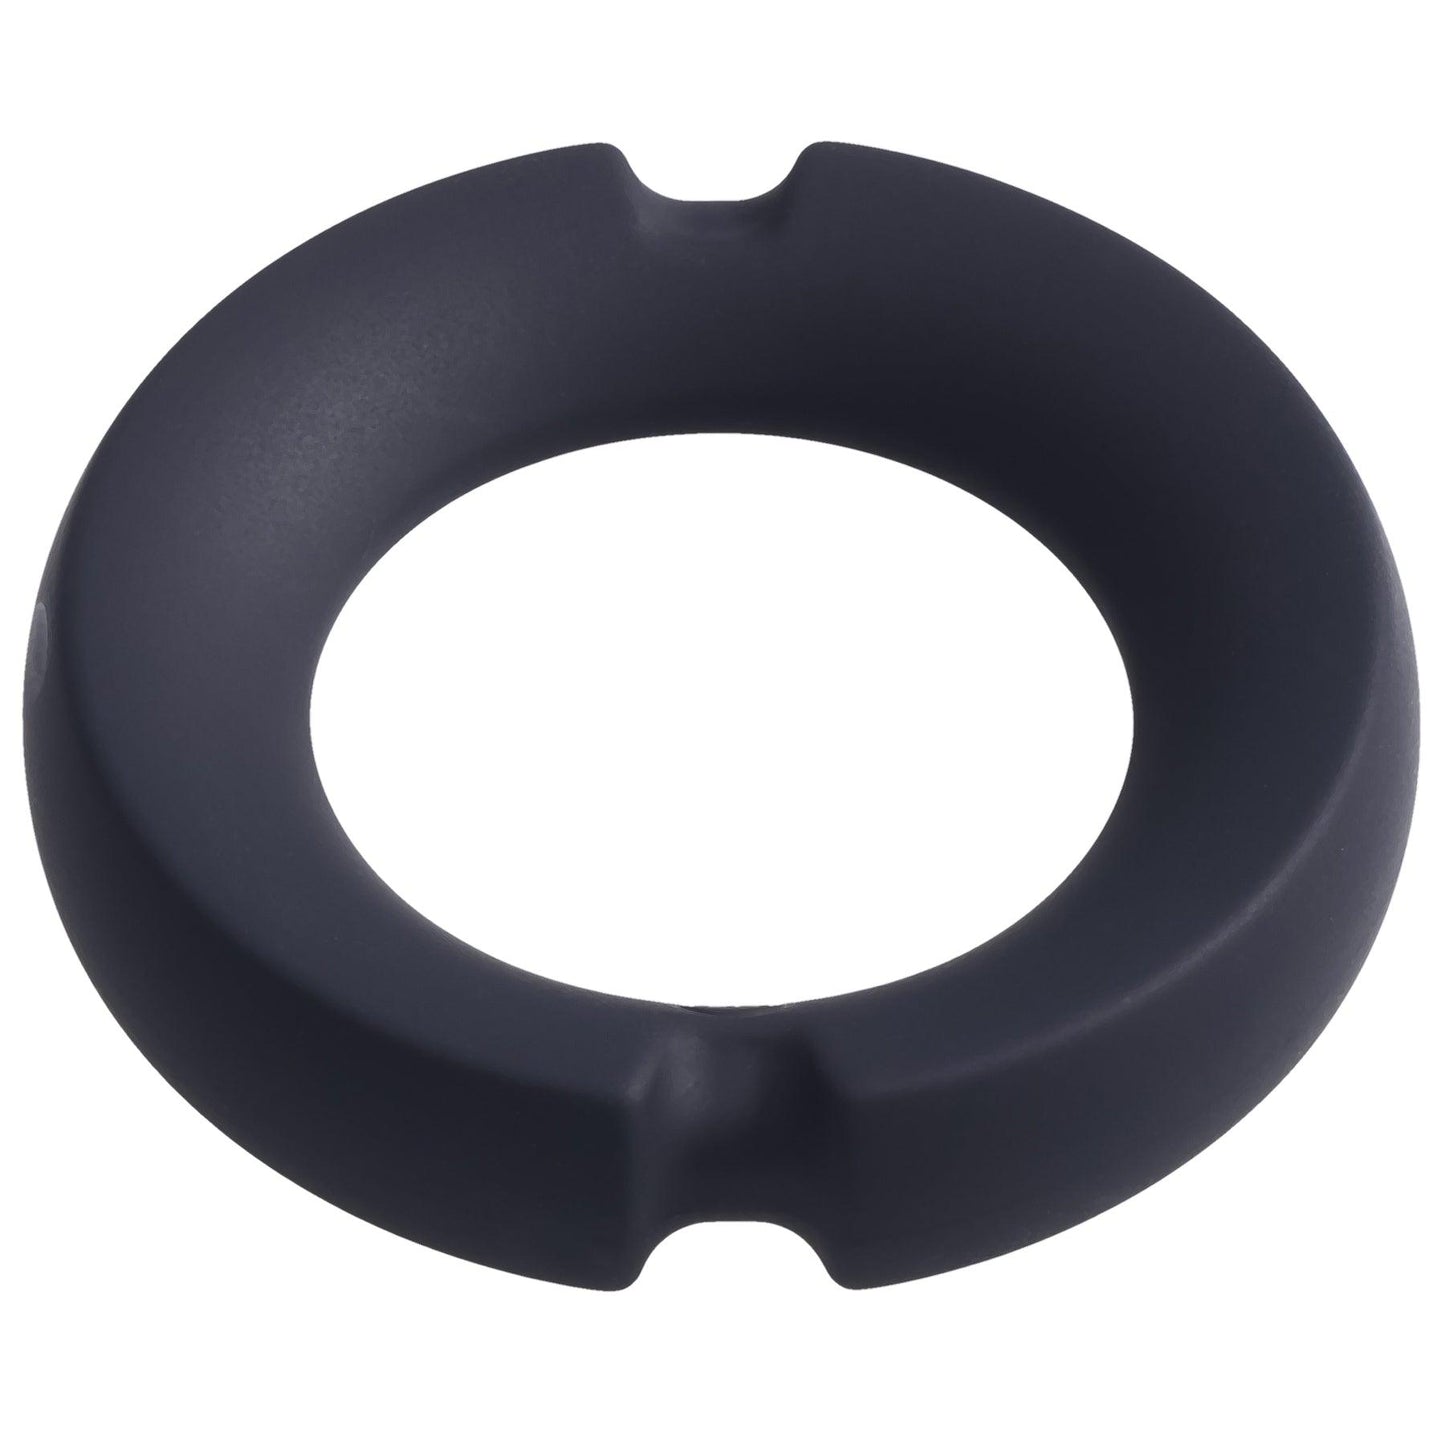 Merci - the Paradox - Silicone Covered Metal Cock Ring - 45mm - Black - My Sex Toy Hub